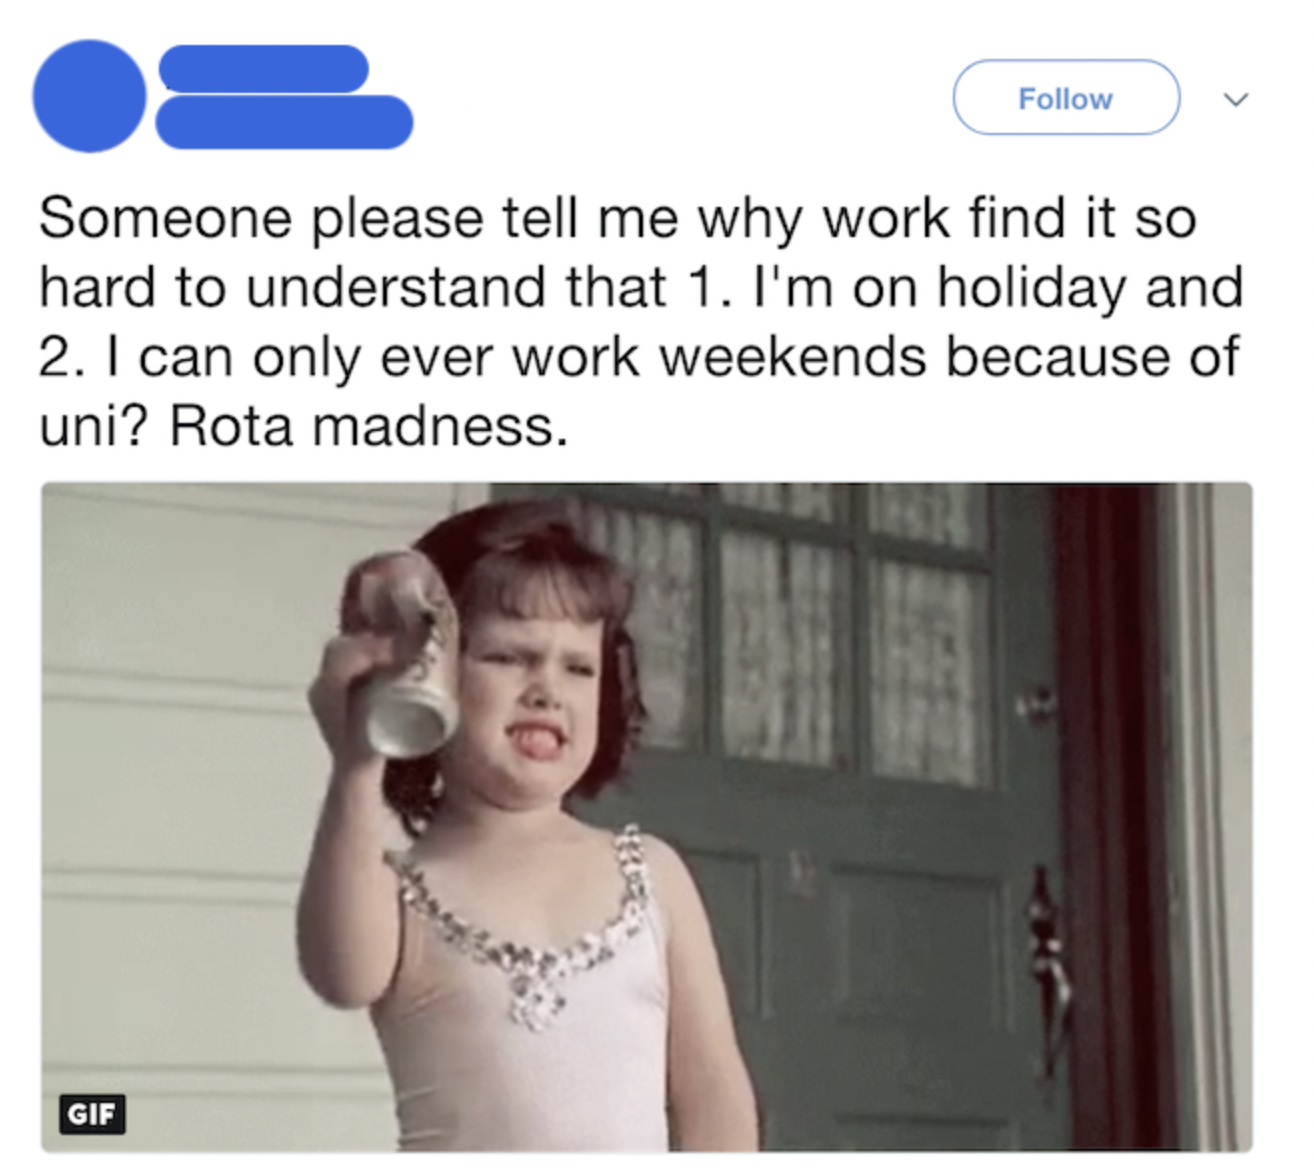 Screenshot of tweet reading, "Why does work find it so hard to understand that I'm on holiday and can only work weekends because of uni?" with gif of little girl crushing a drinks can.